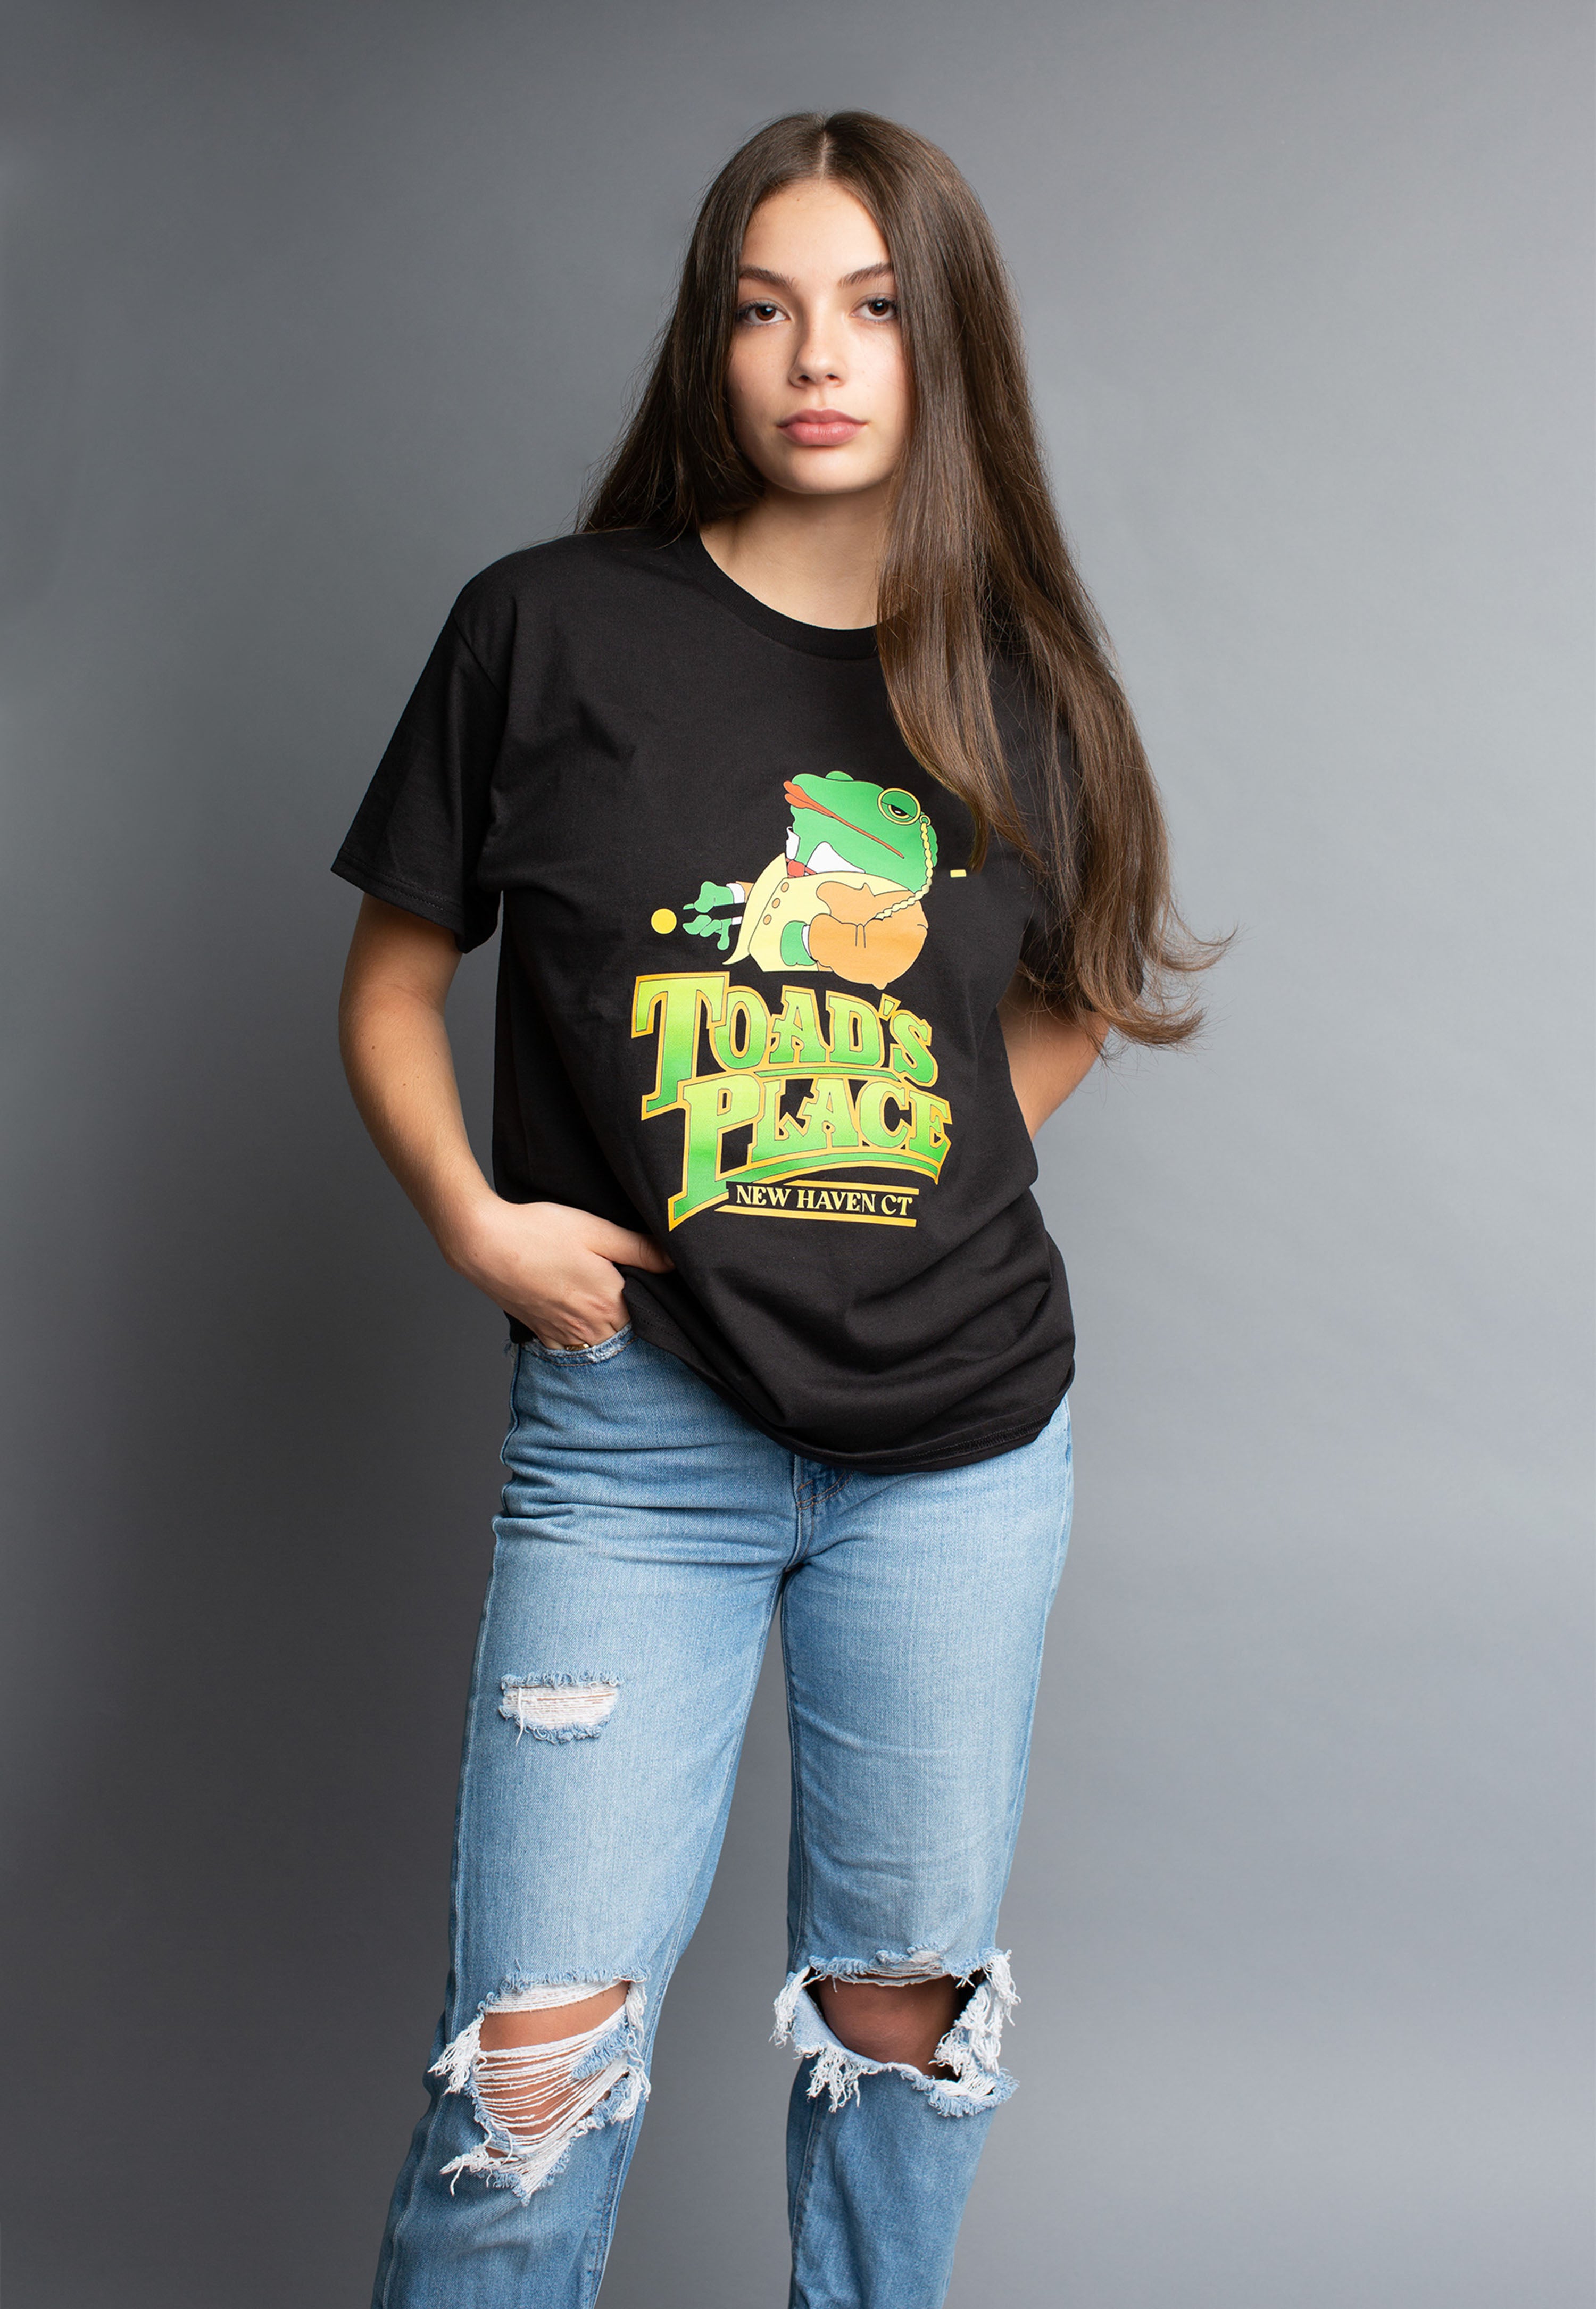 Toad's Place Black Tee - New Design!